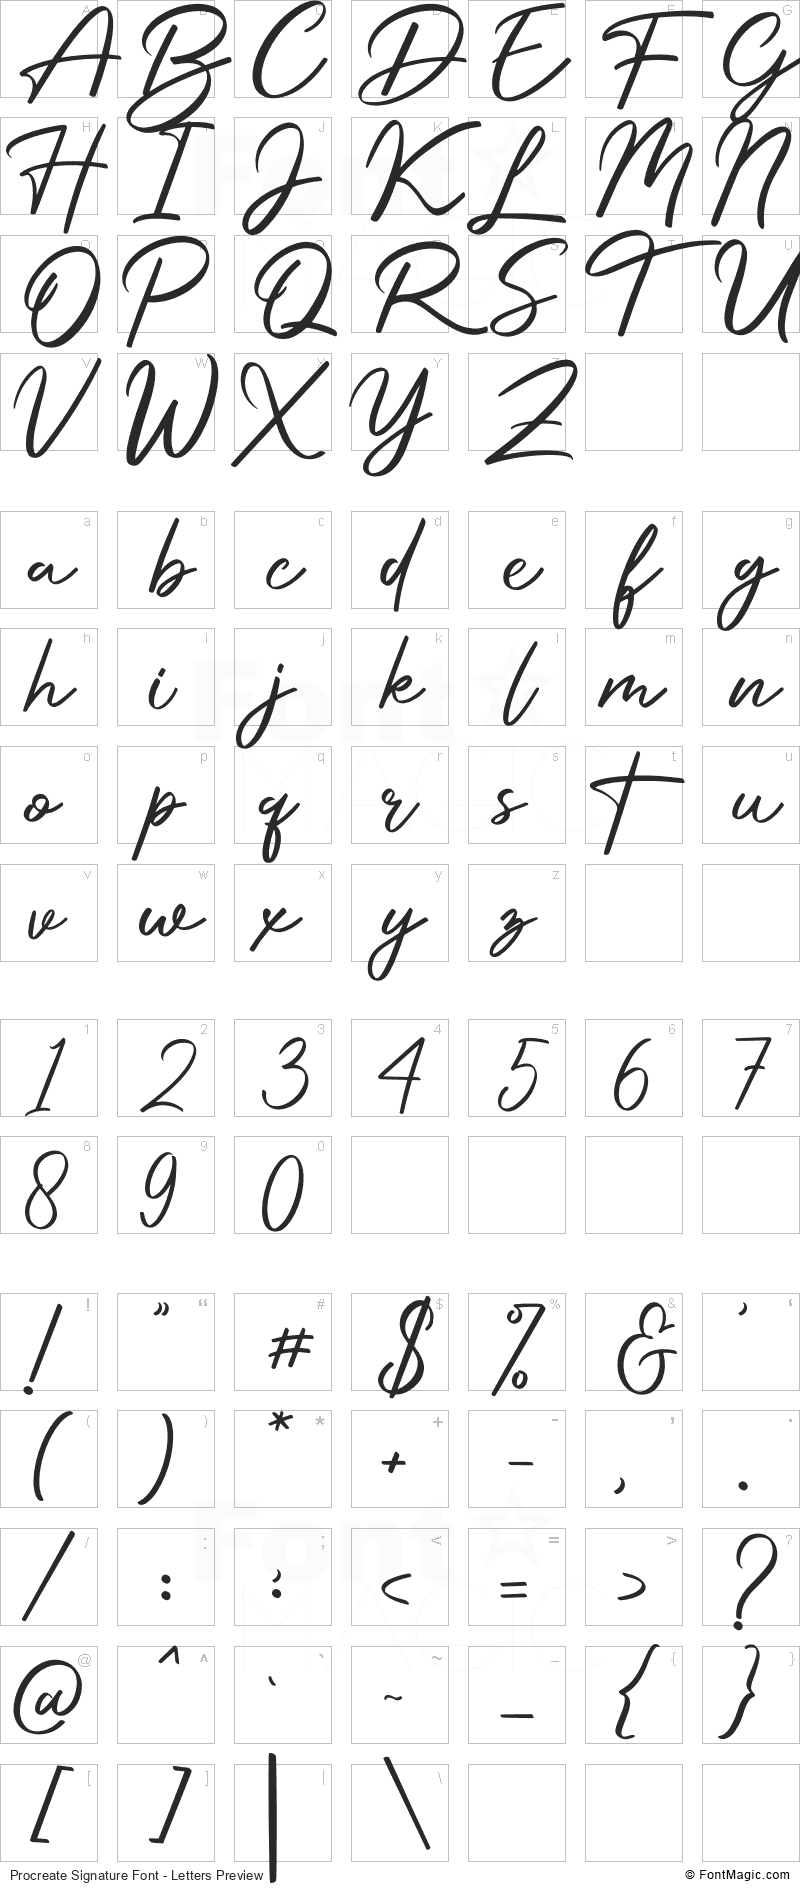 Procreate Signature Font - All Latters Preview Chart